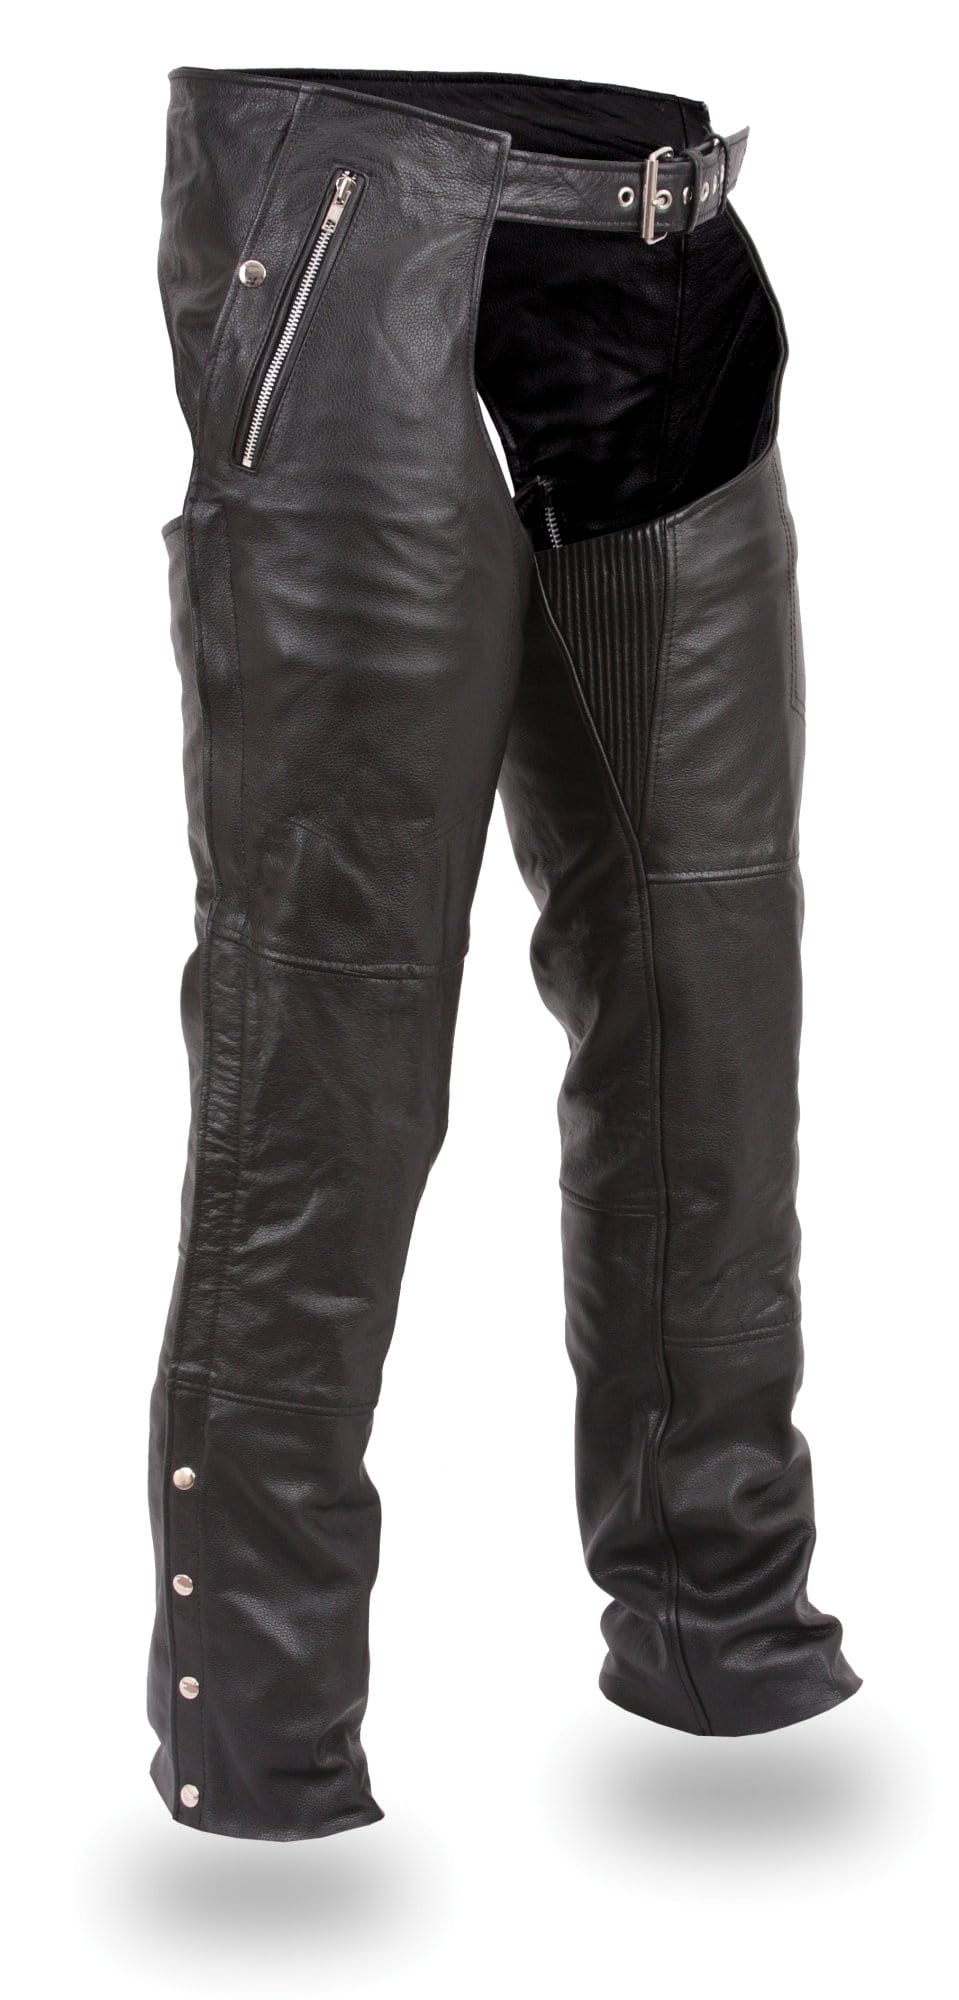 REAL LEATHER CHAPS elder fetish gay jeans pants GAY CHAPS/BIKER TROUSER - MRI Leathers